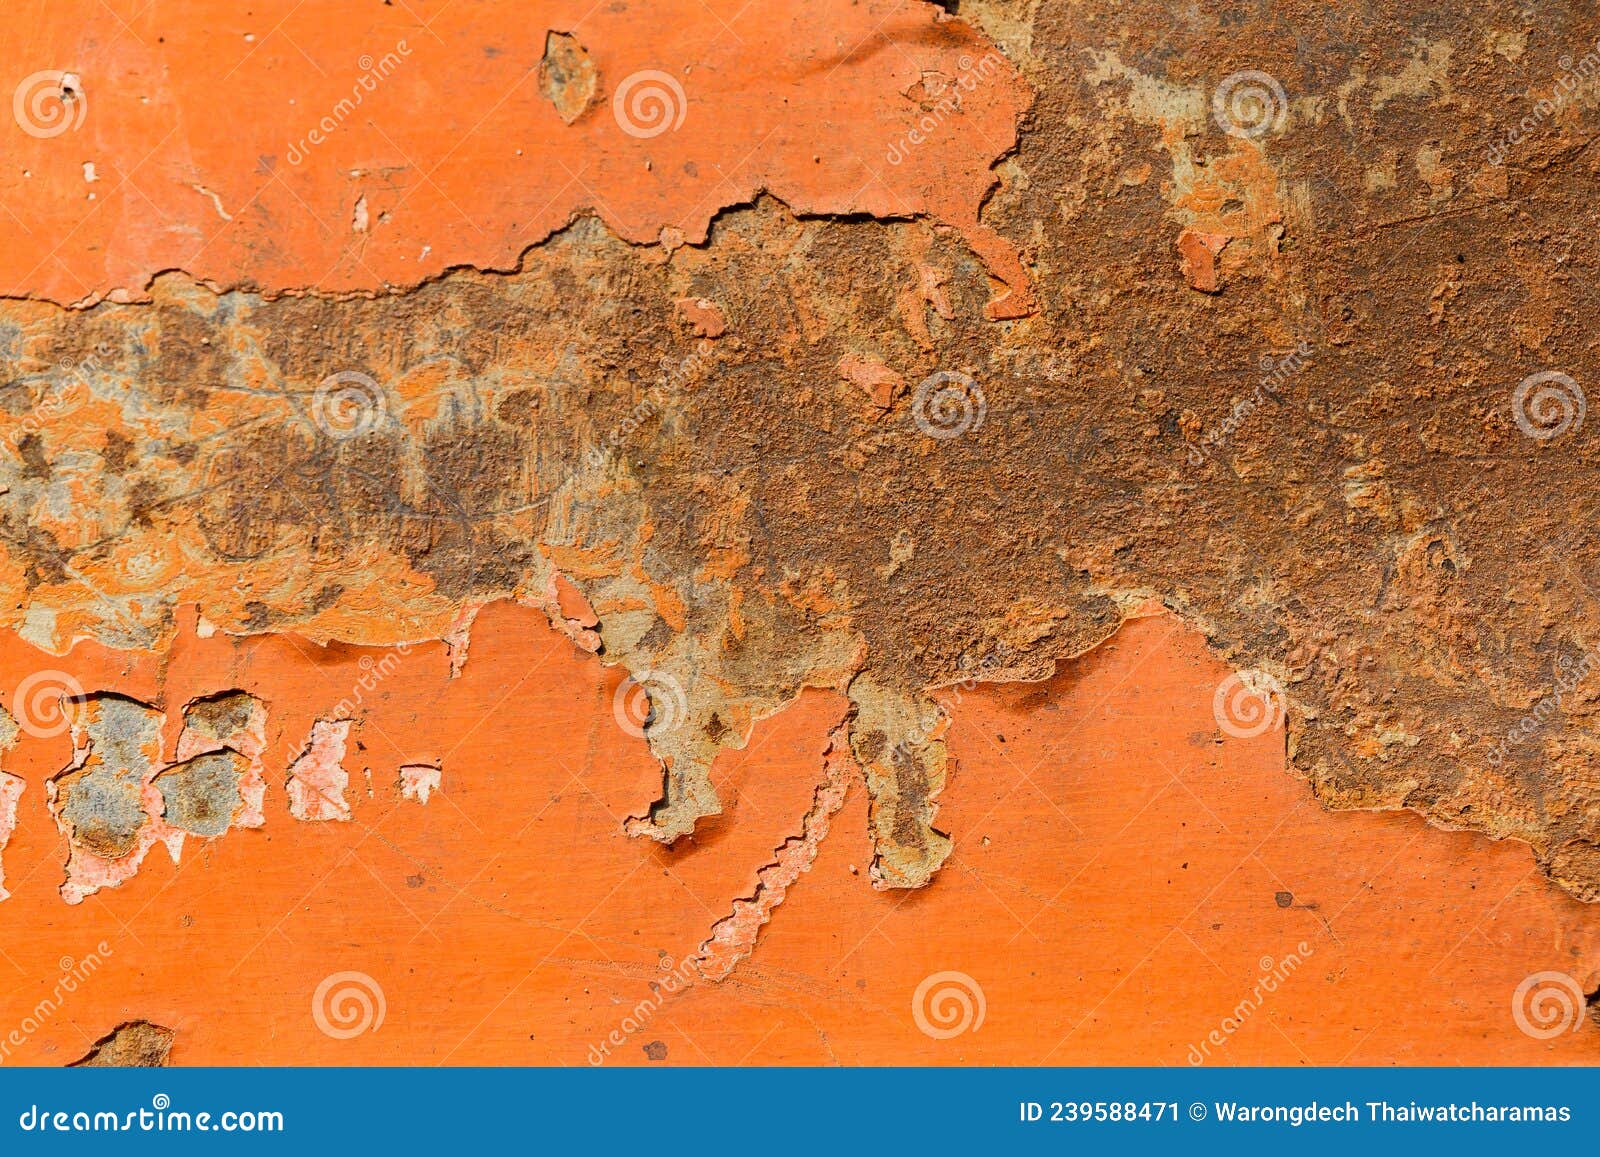 rusty grunge metal texture as a background